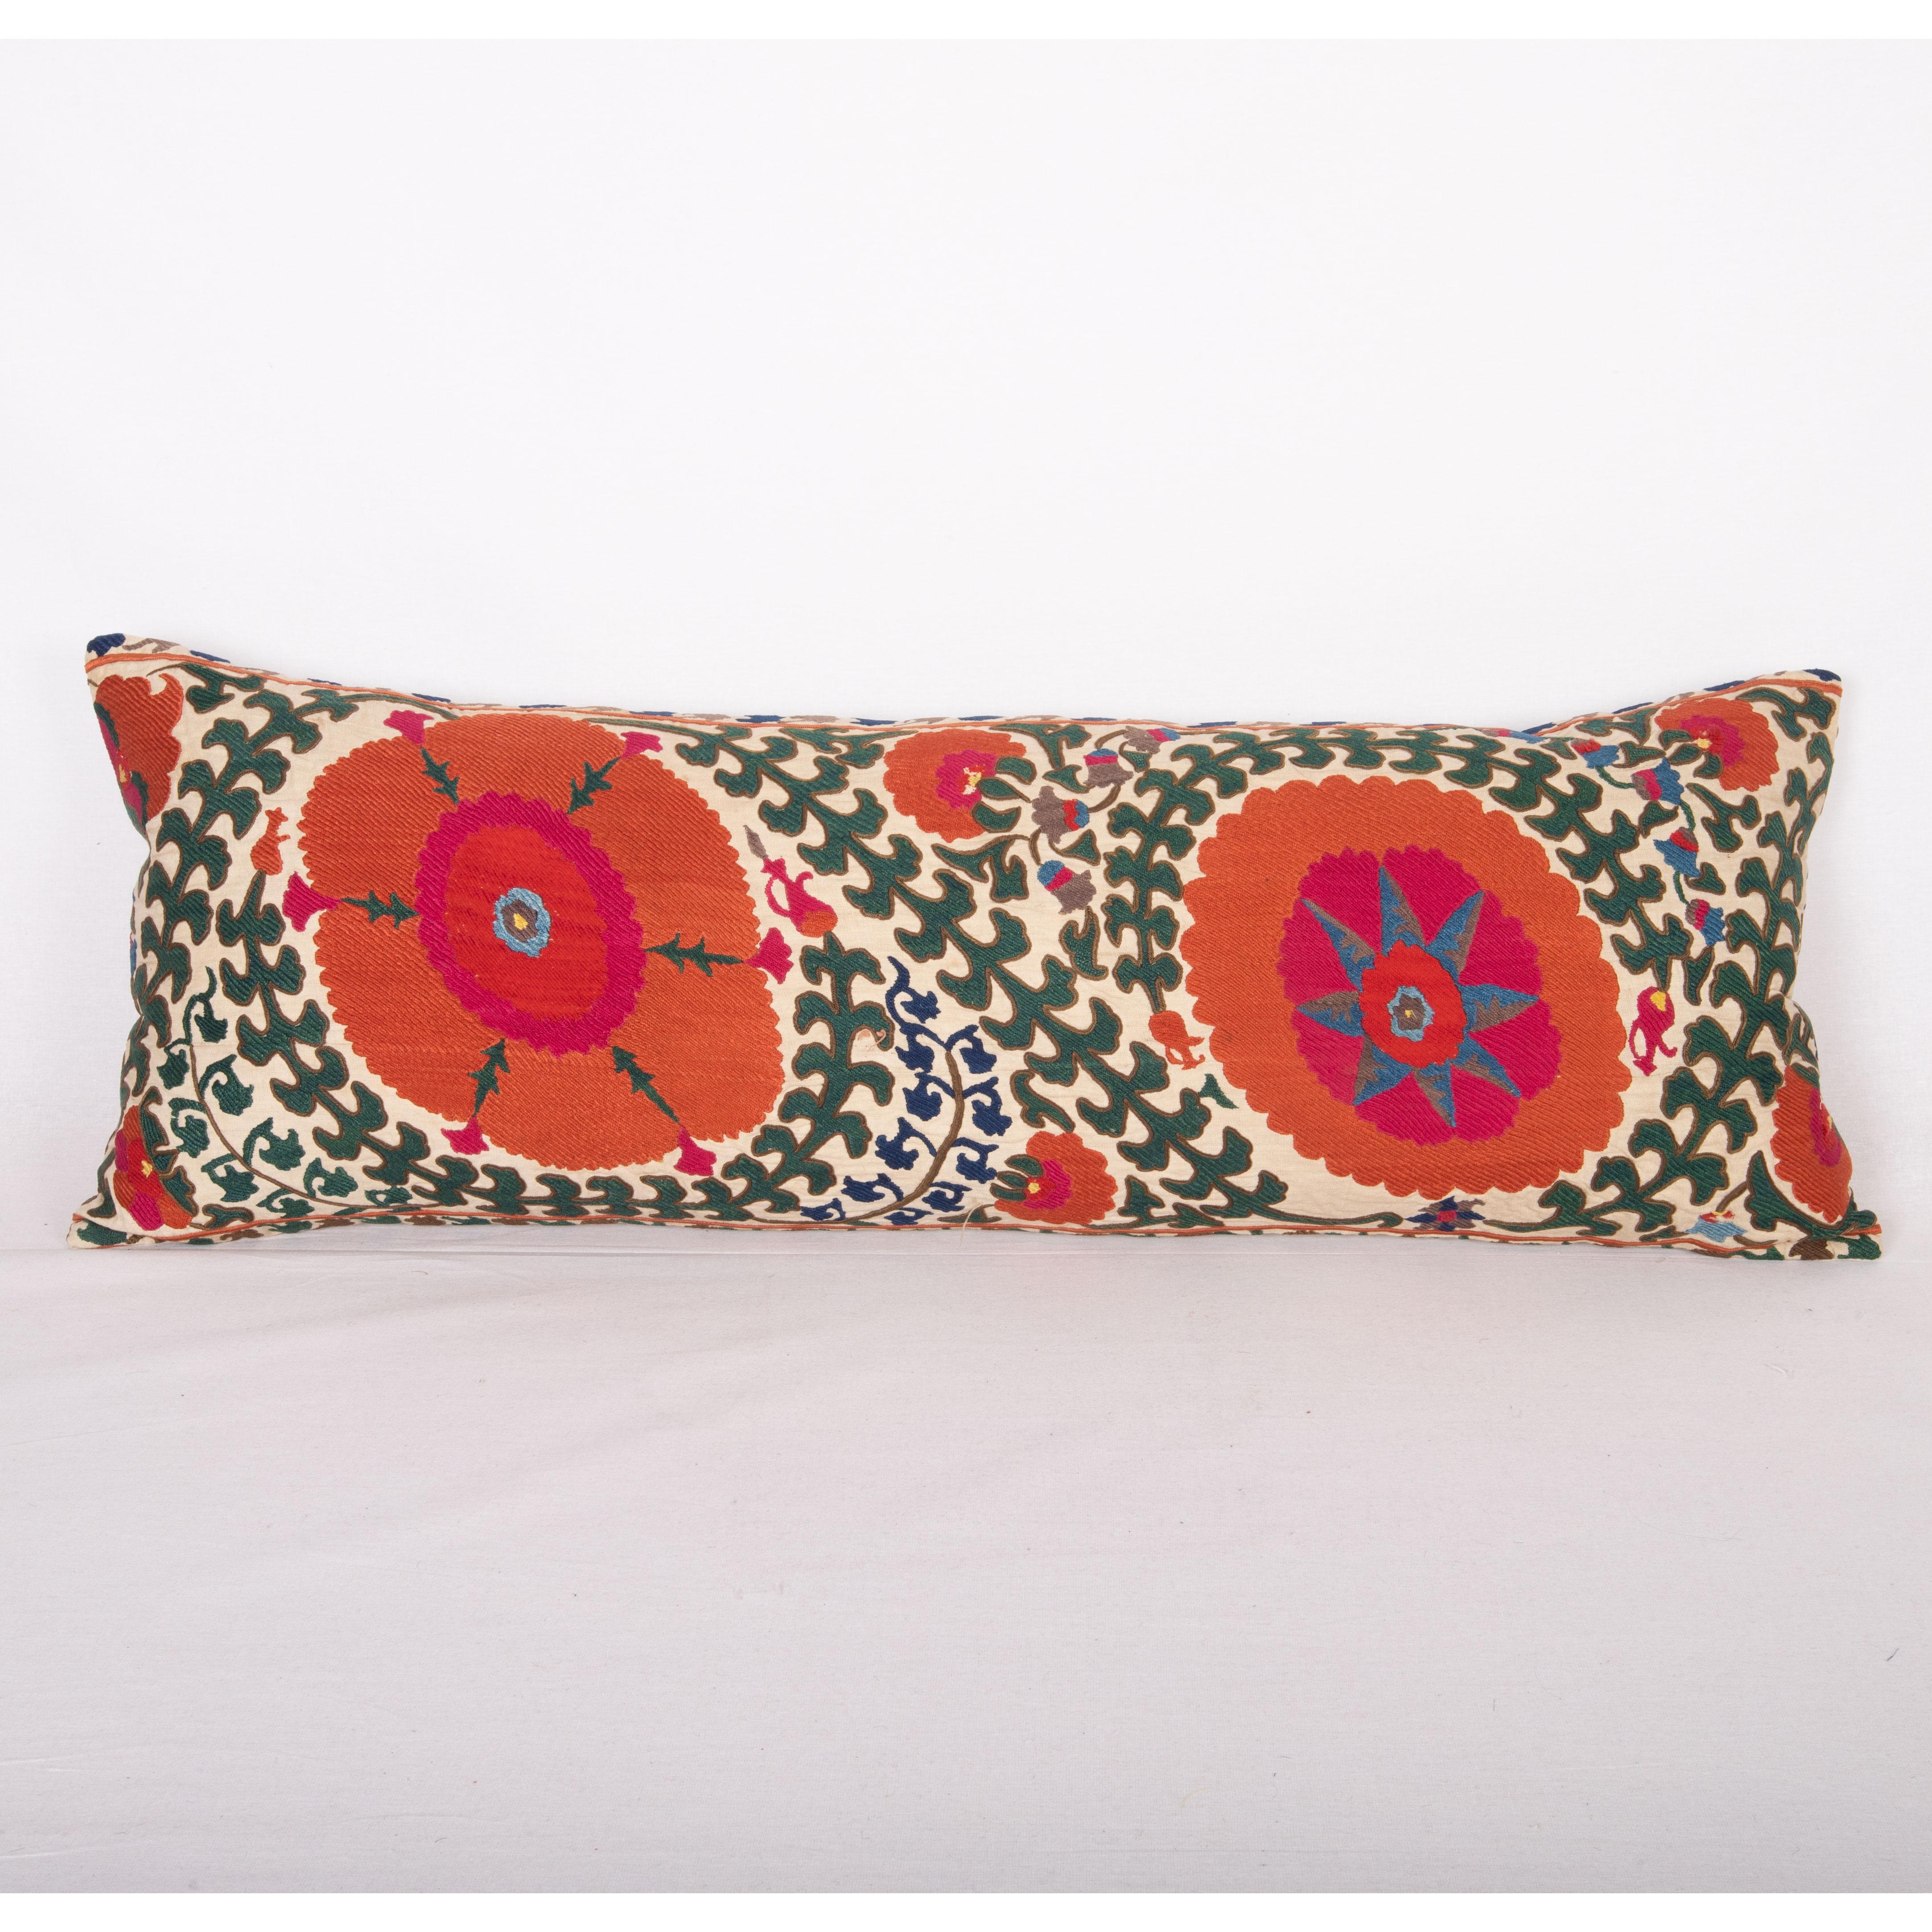 This suzani pillow is made from a mid-19th C. Suzani from Bukhara Uzbekistan.

It does not come with an insert but a bag made to the size to accommodate insert materials.
Linen in the back.
Zipper closure.
Dry cleaning is reccommended.
 